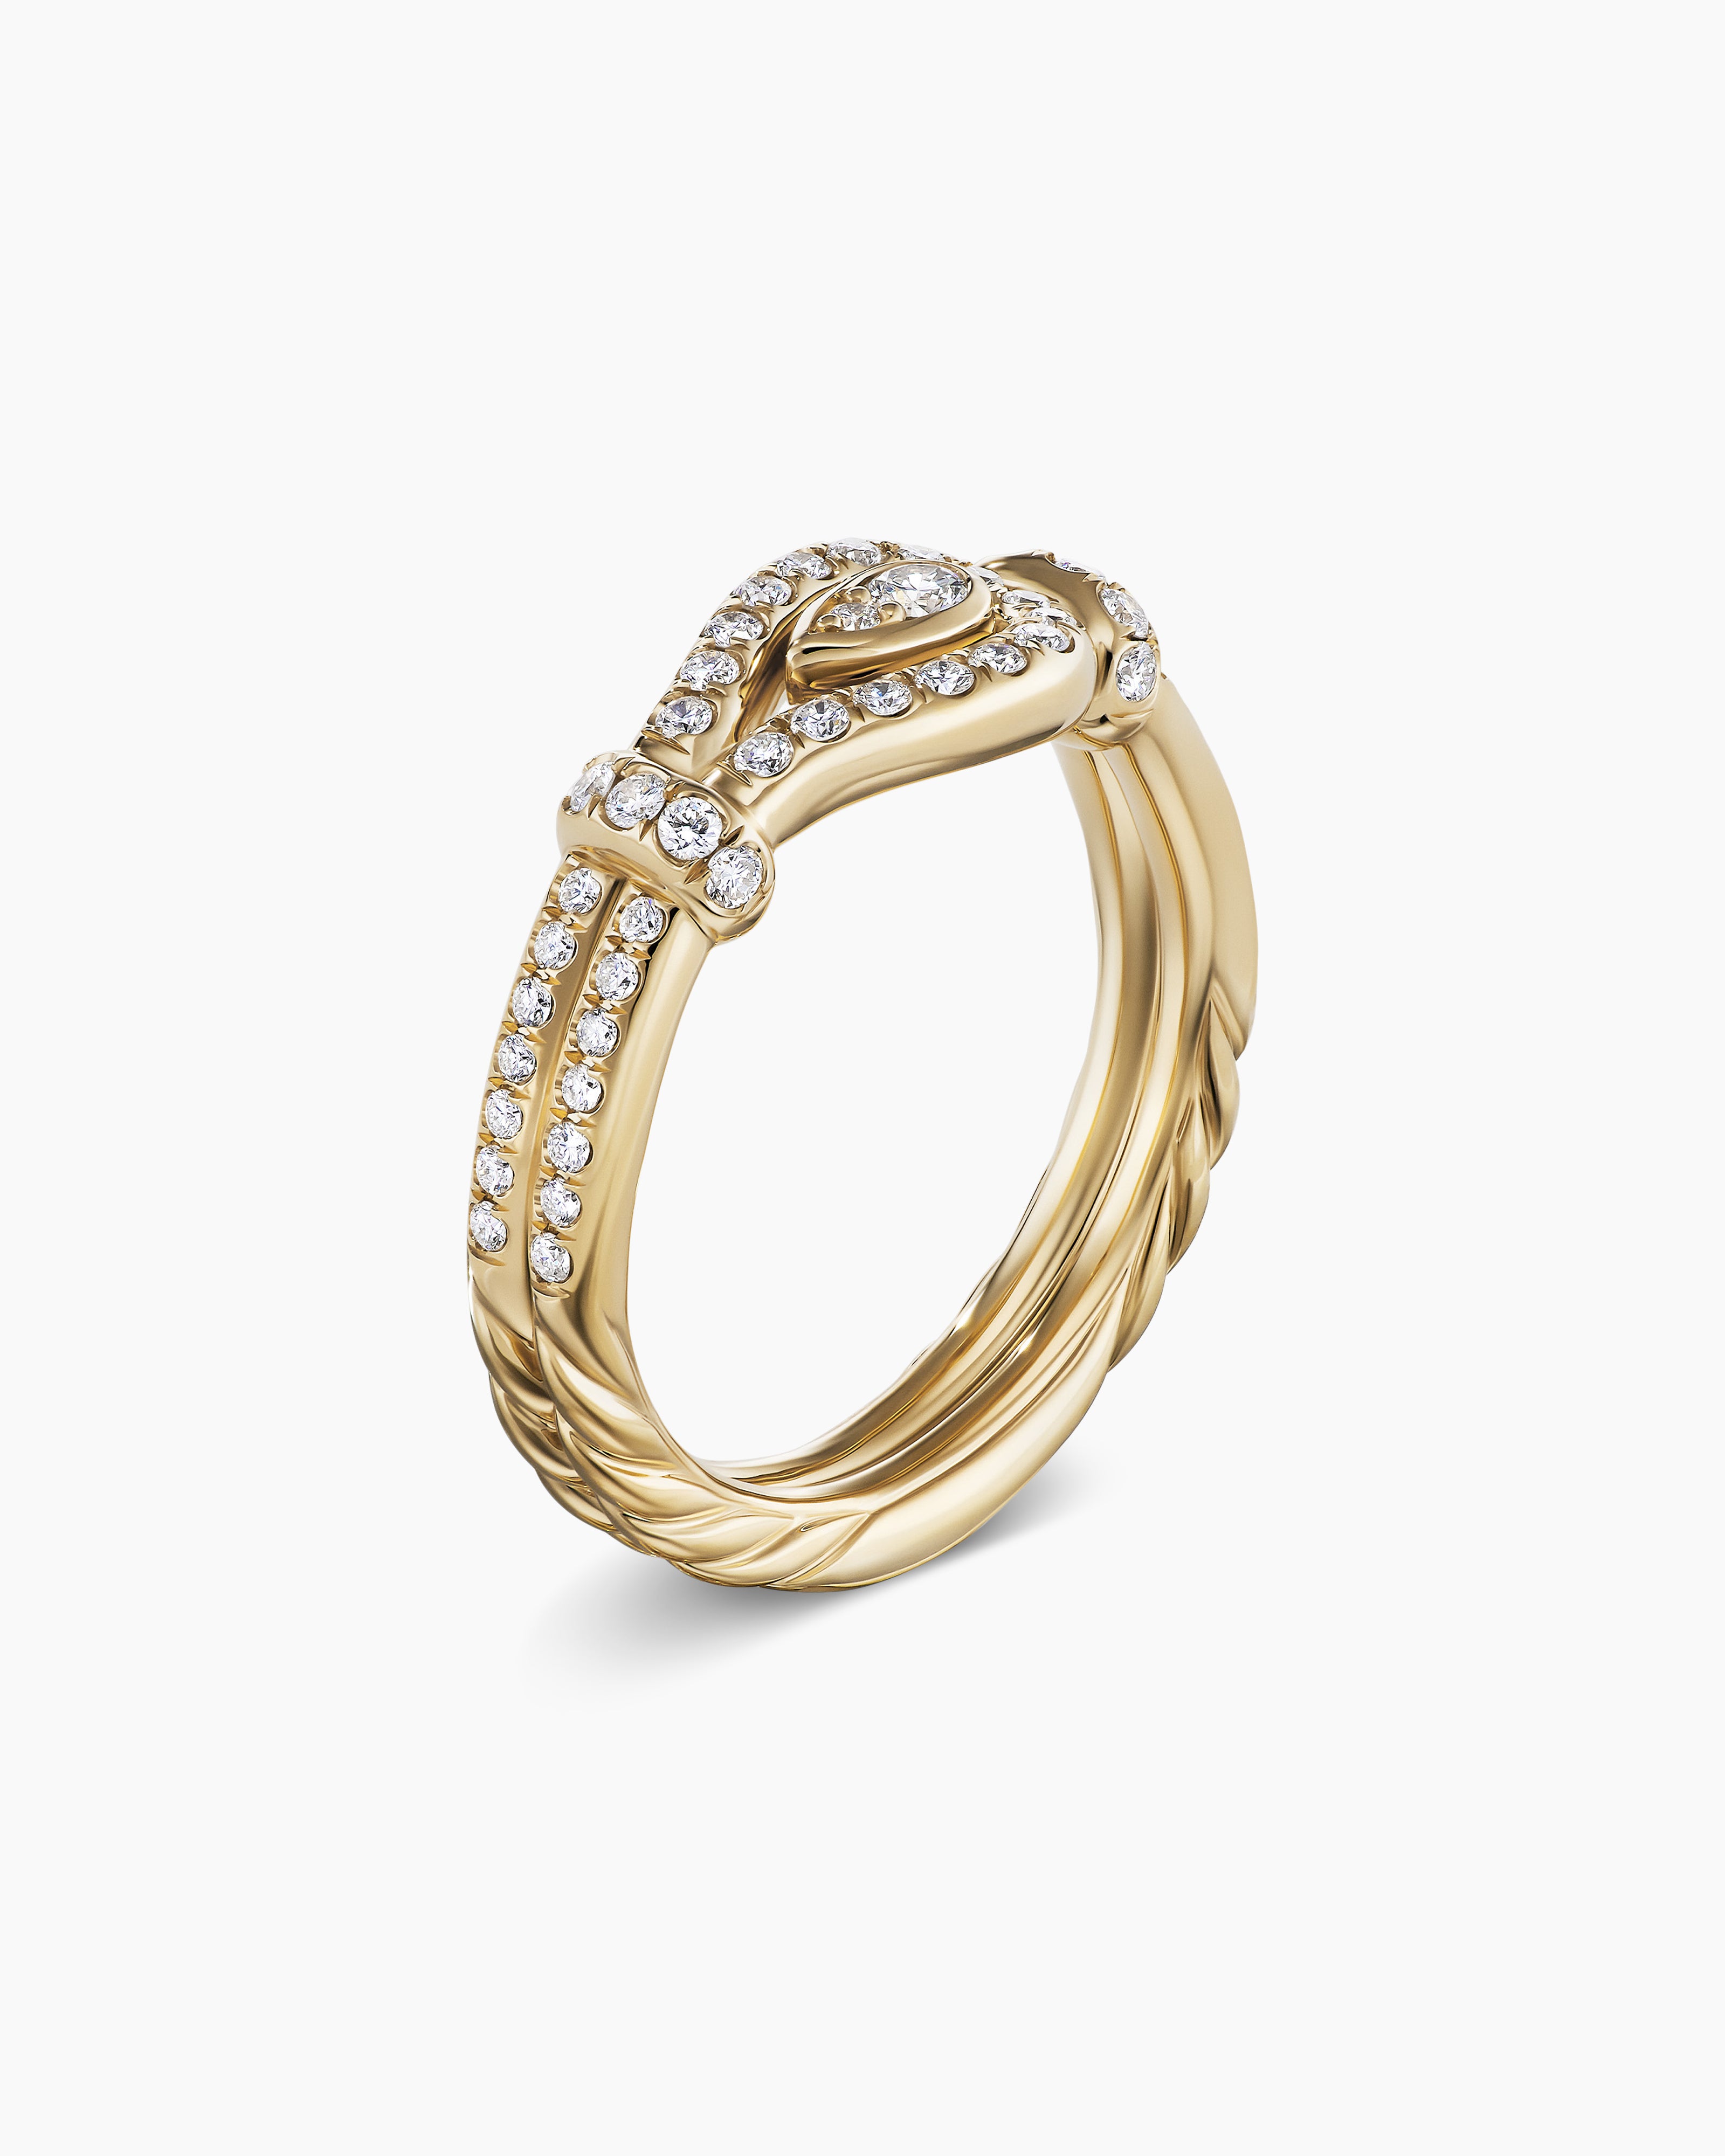 Thoroughbred Loop Ring in 18K Yellow Gold with Diamonds, 4mm